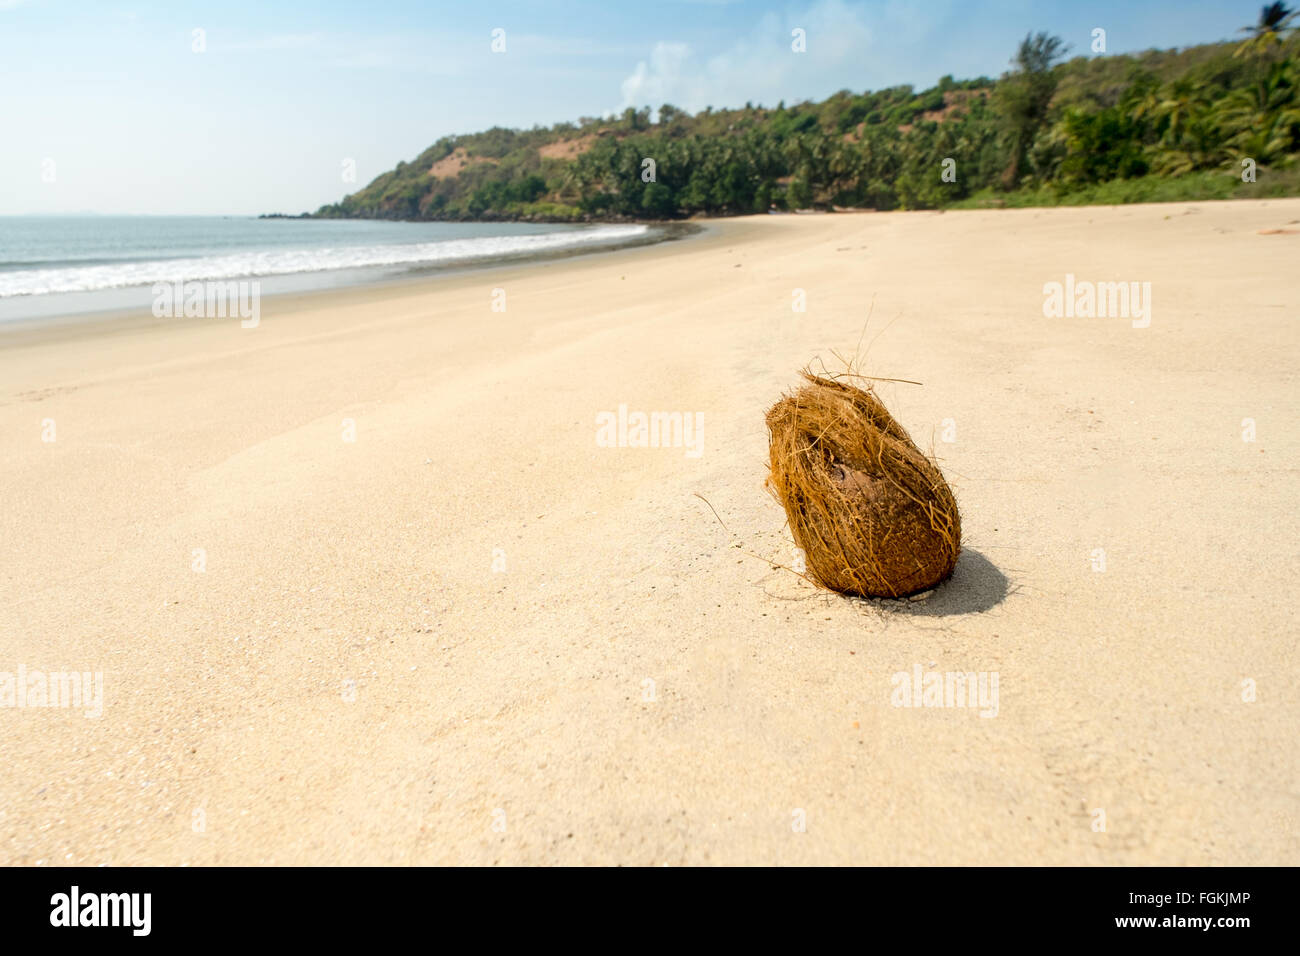 Coconut on the sand of a deserted beach on the Konkan coast in Maharashtra state, southern India Stock Photo